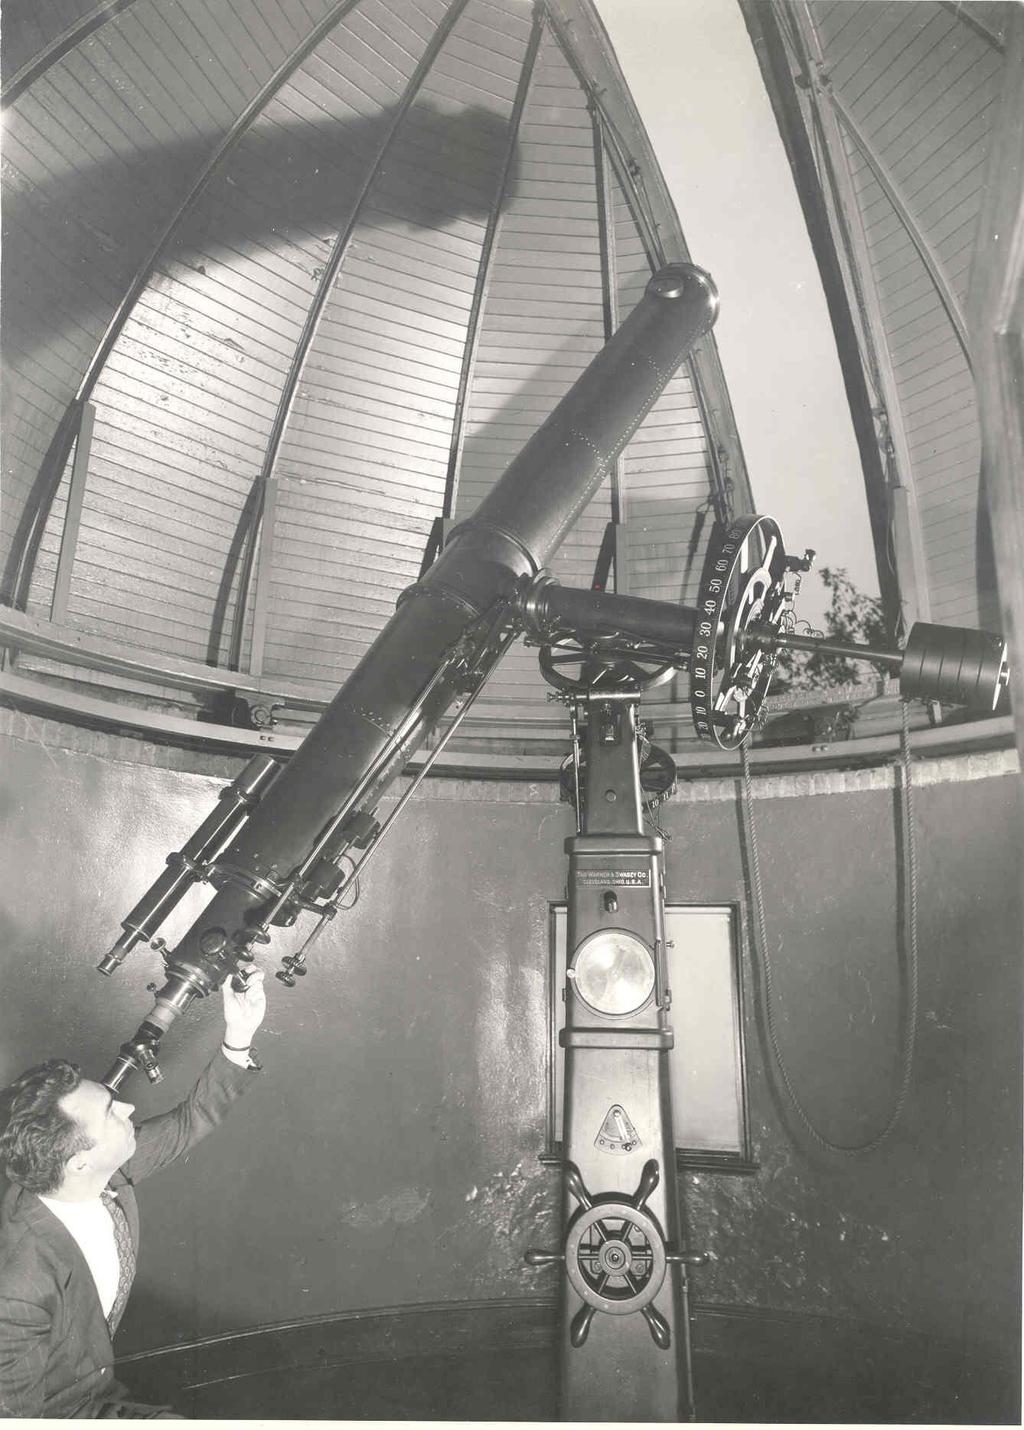 Warner & Swasey gave the 9 ½ inch telescope to Case in 1919.